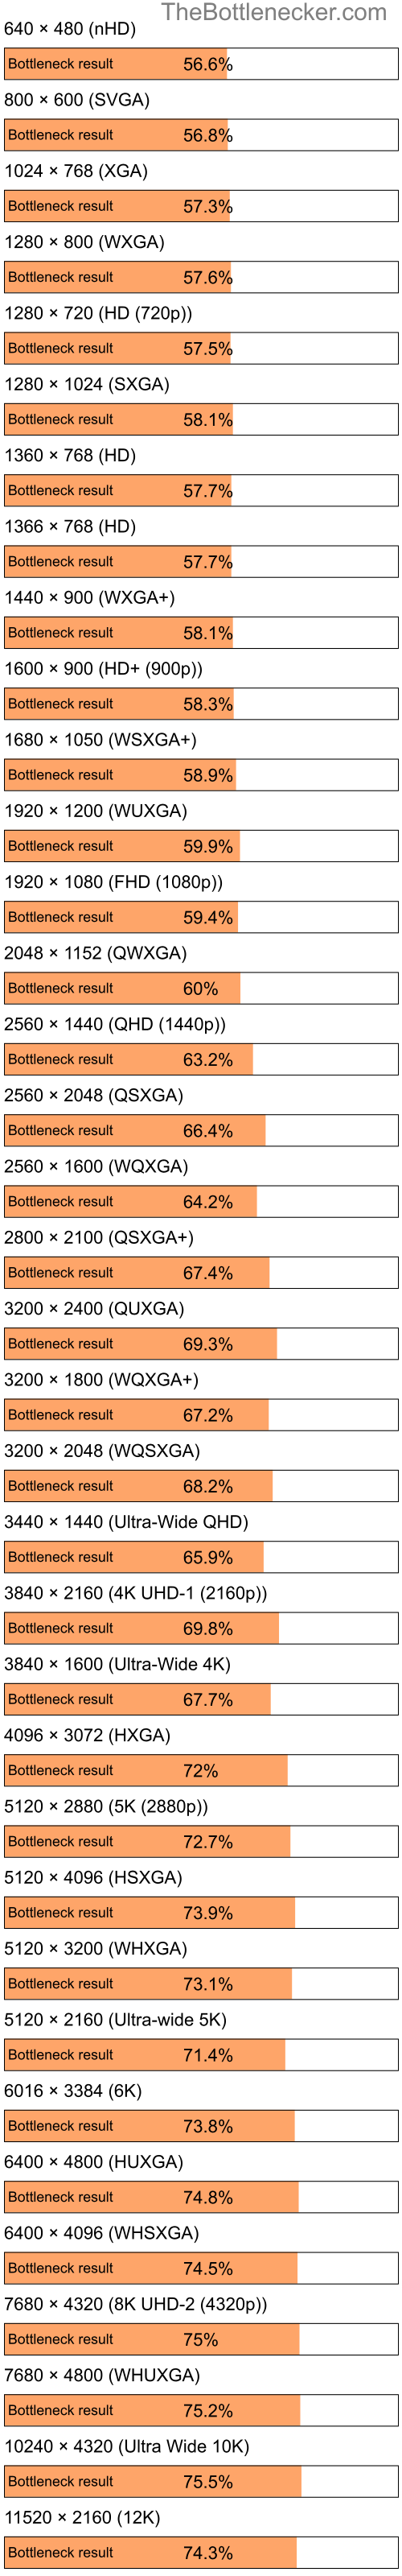 Bottleneck results by resolution for Intel Atom N280 and NVIDIA Quadro FX 370M in Processor Intense Tasks